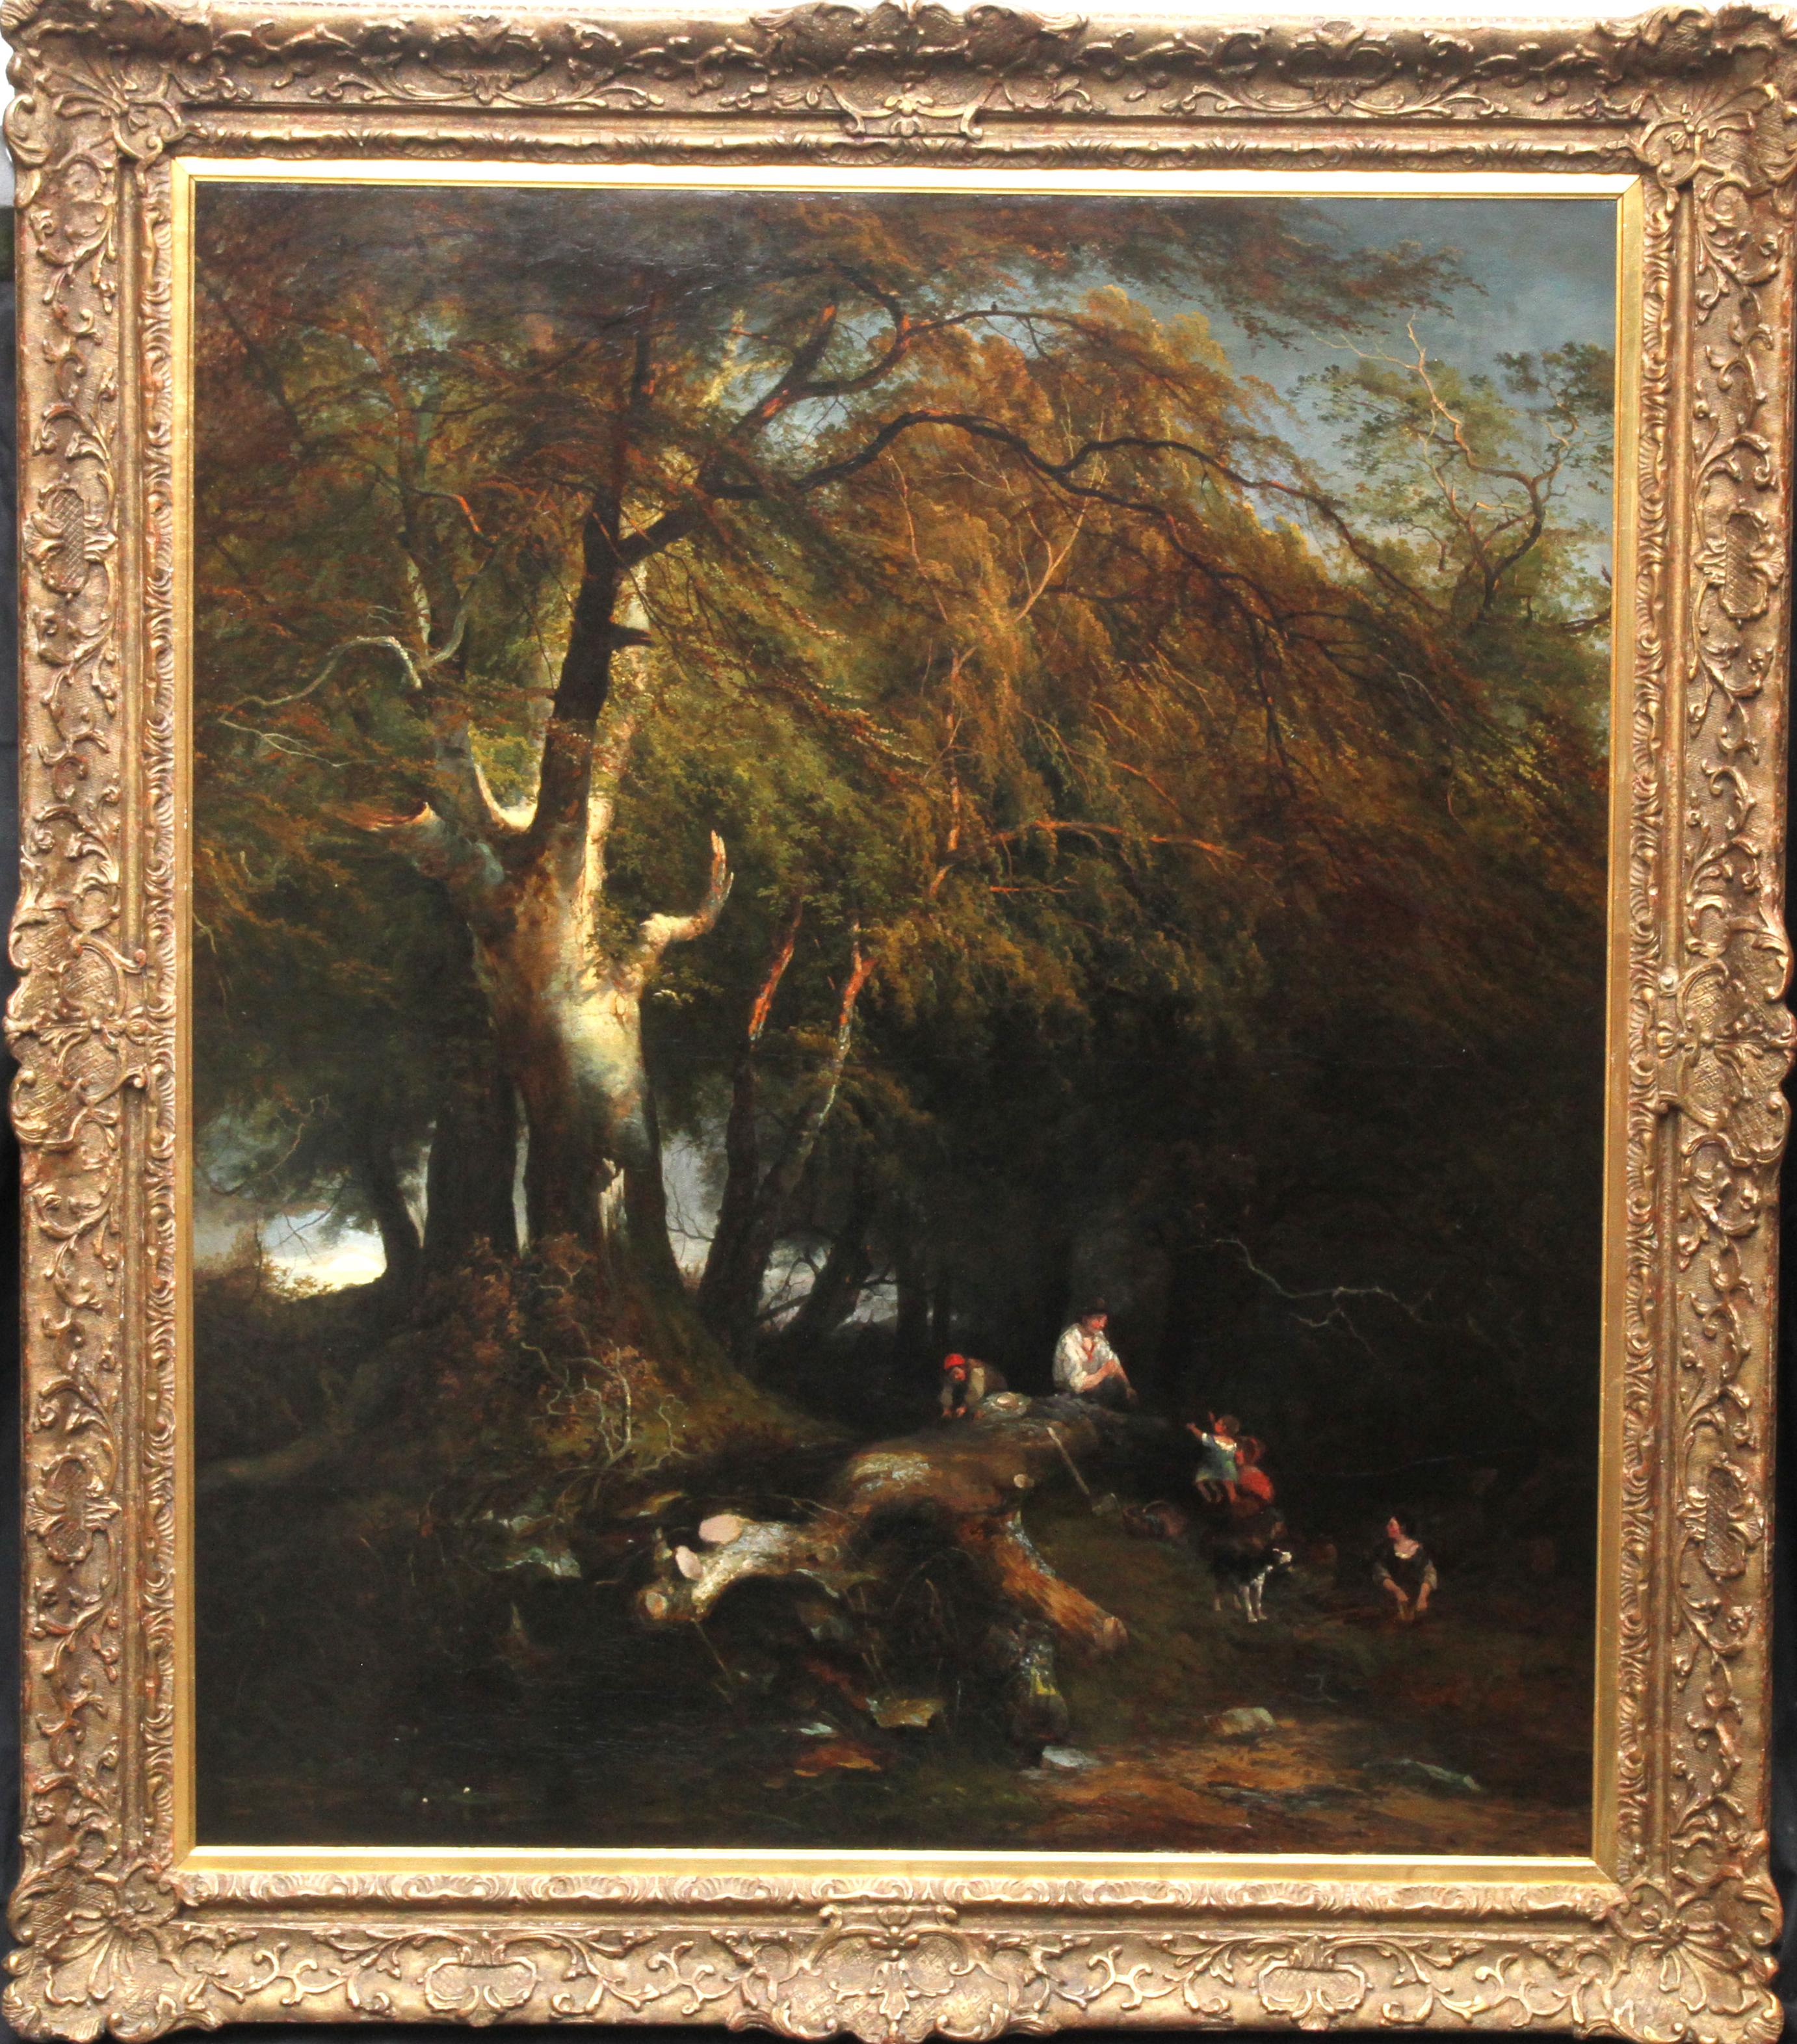 The Woodman's Family in a Landscape - British 1869 Victorian art oil painting